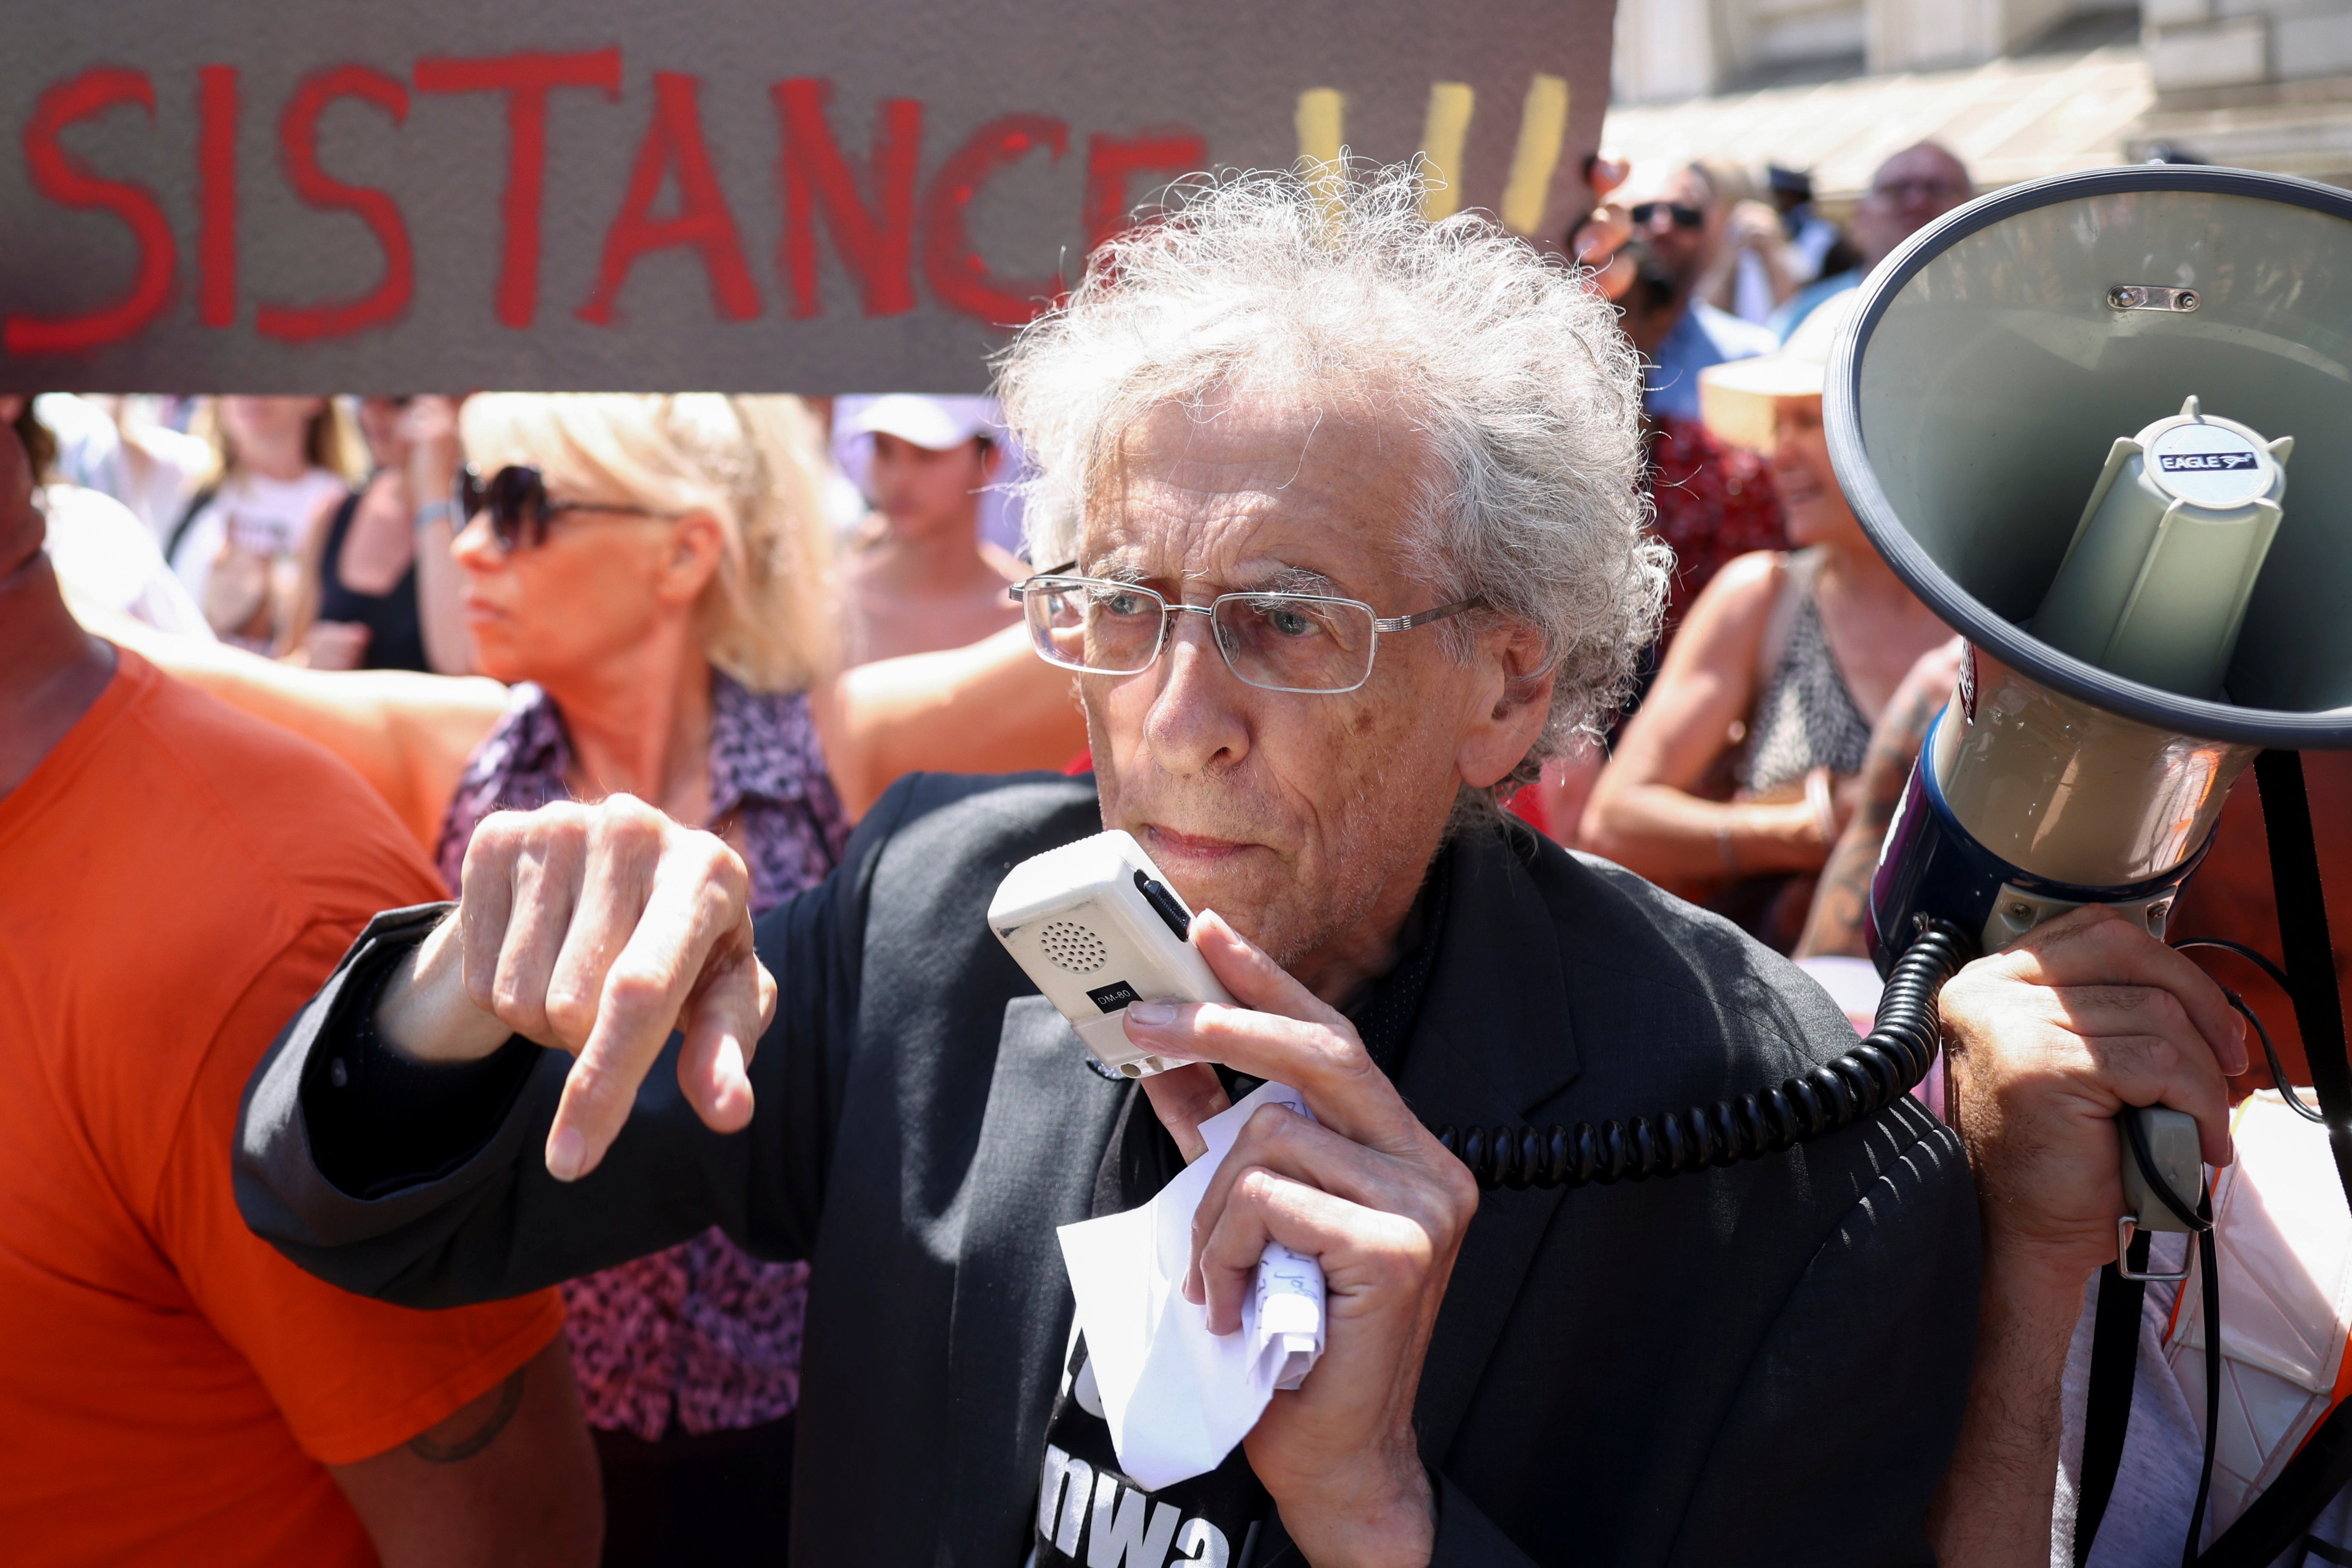 Activist Piers Corbyn takes part in an anti-lockdown and anti-vaccine protest in Downing Street in June